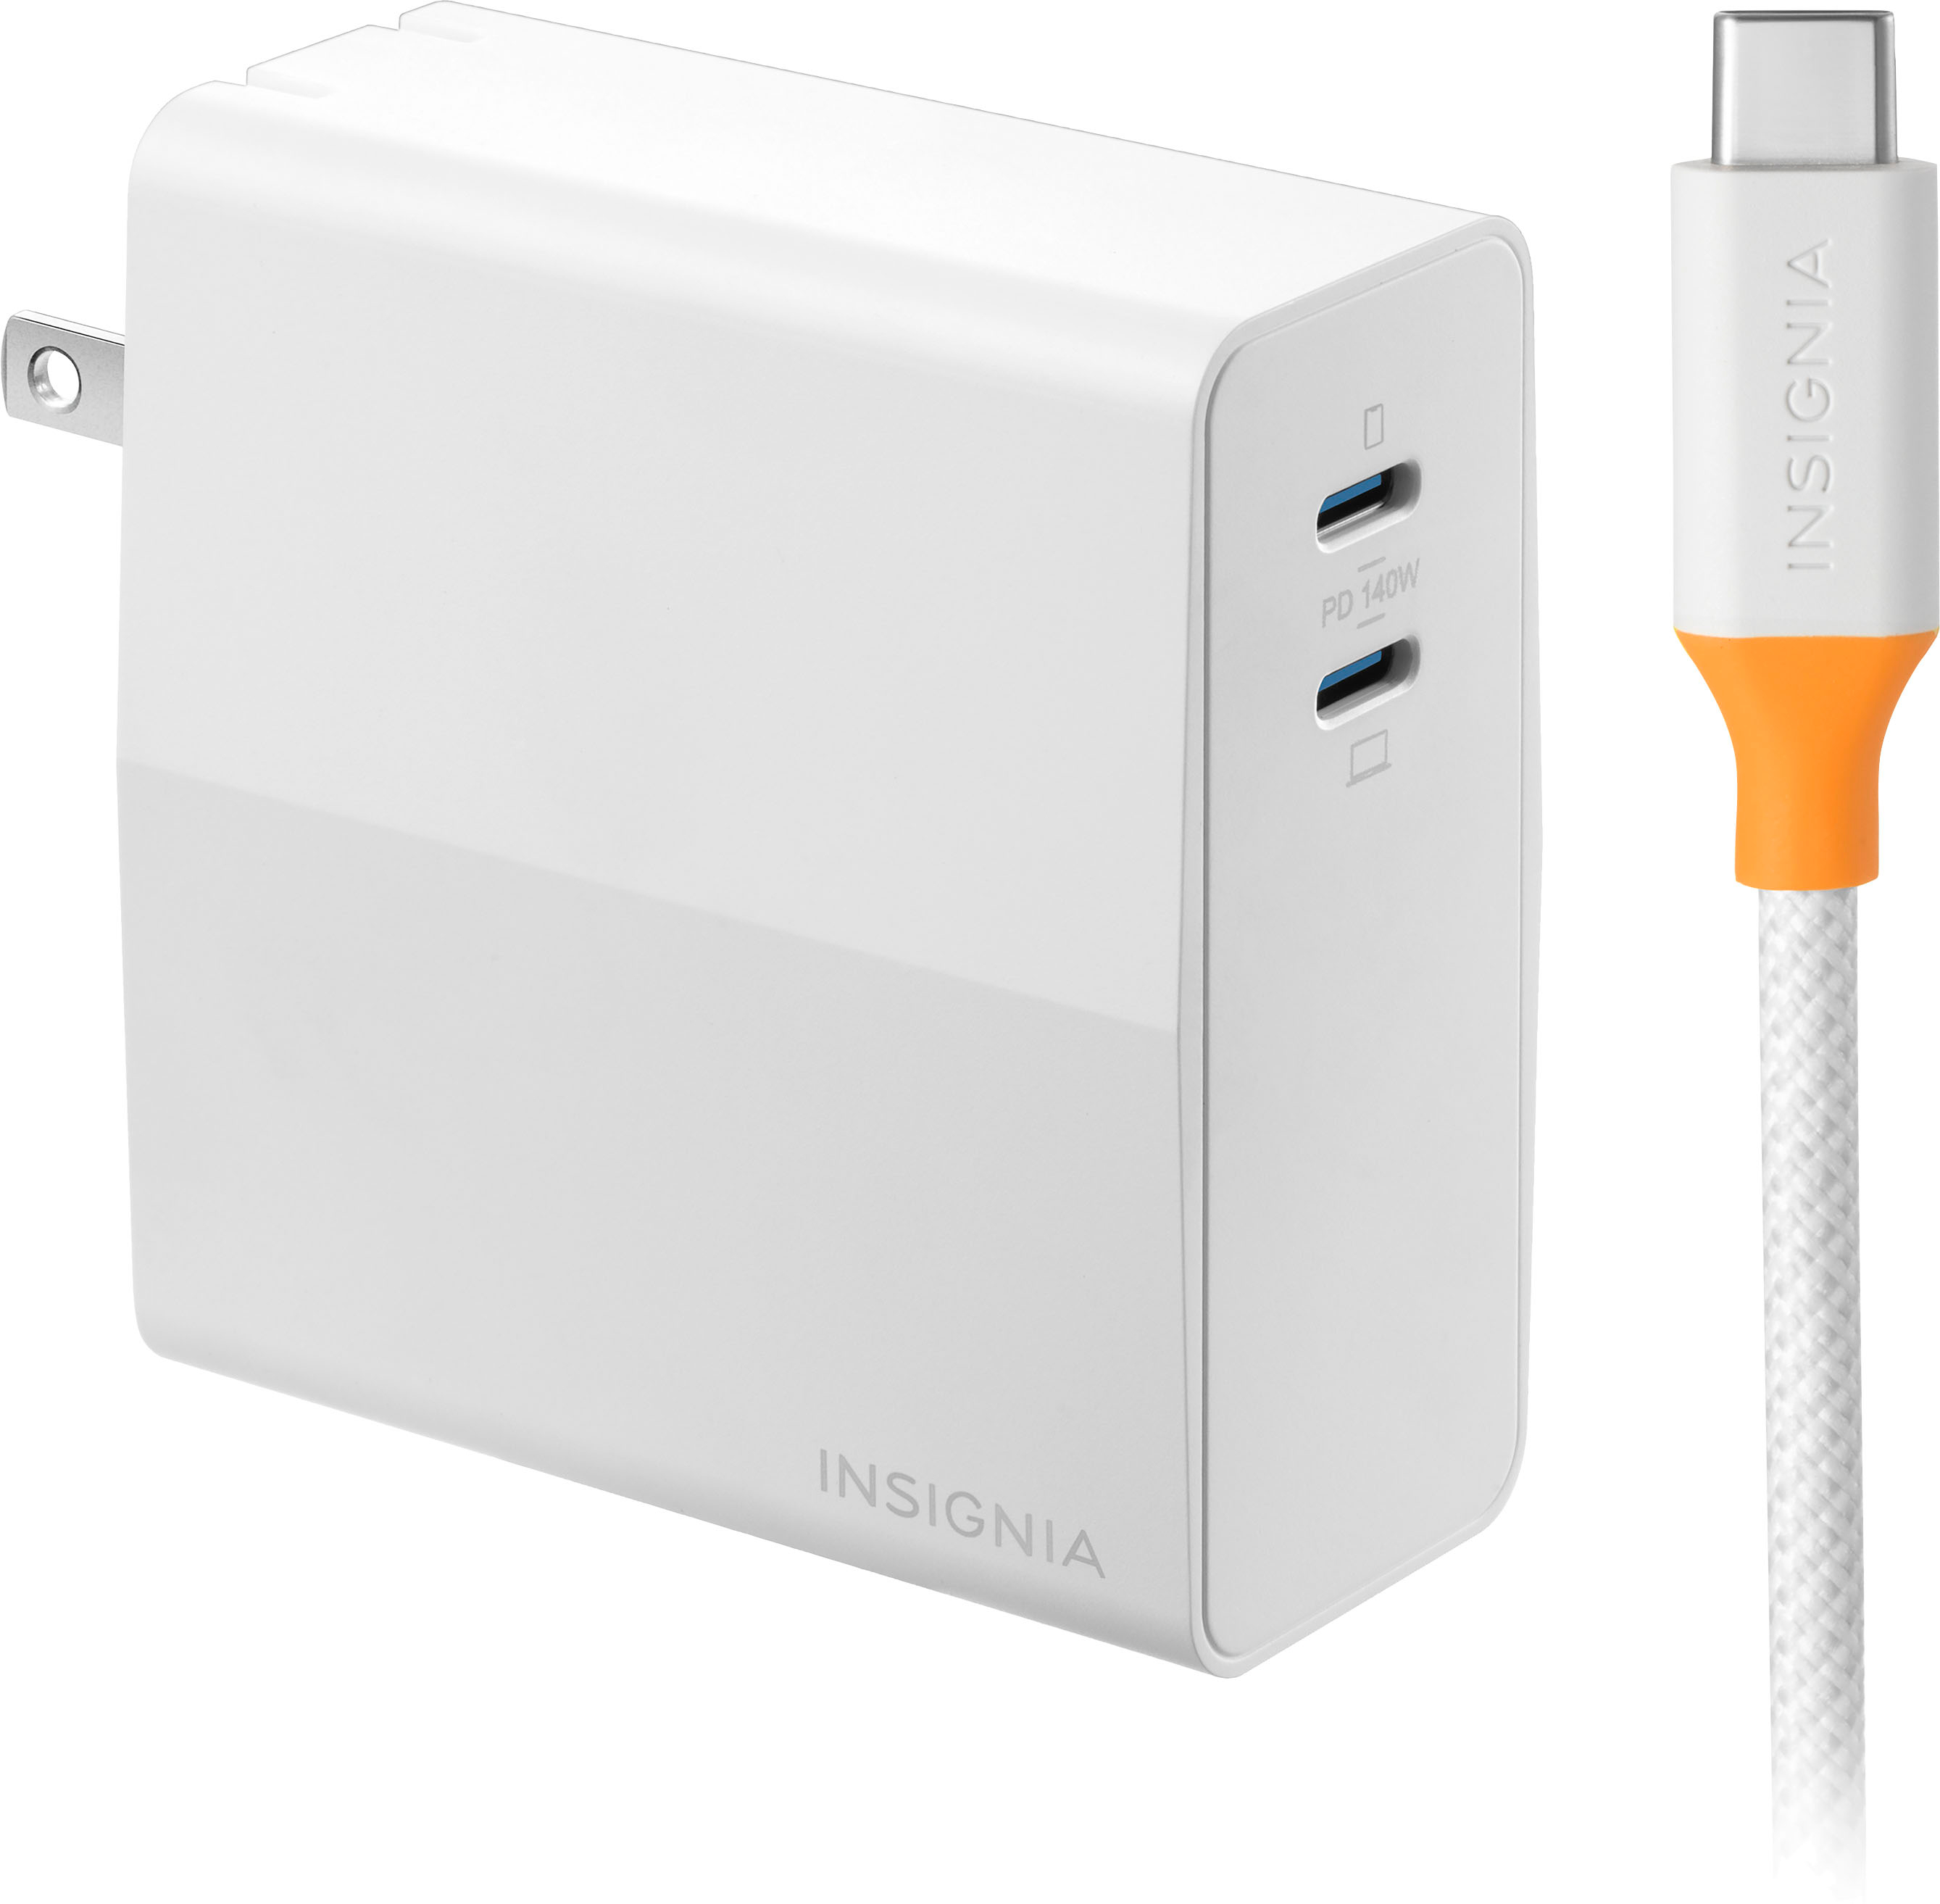 Insignia™ 45W USB-C Compact Super Fast Charging Wall Charger Kit for USB-C  Smartphones & Tablets - Best Buy